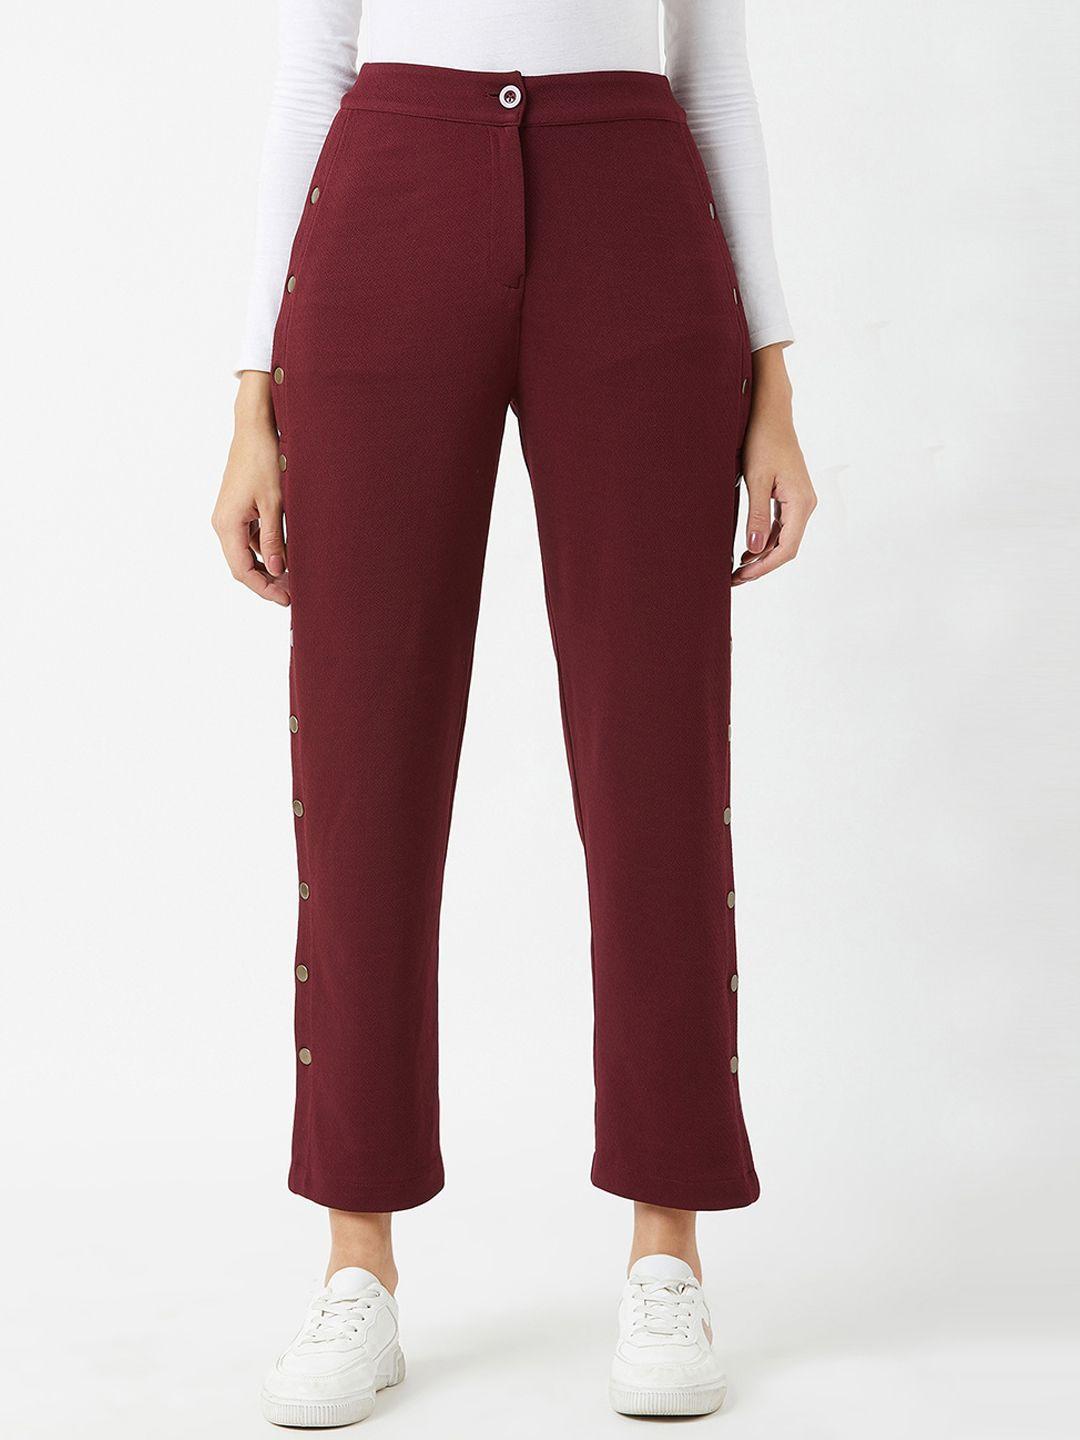 The Roadster Lifestyle Co High-Waisted Snap Trousers